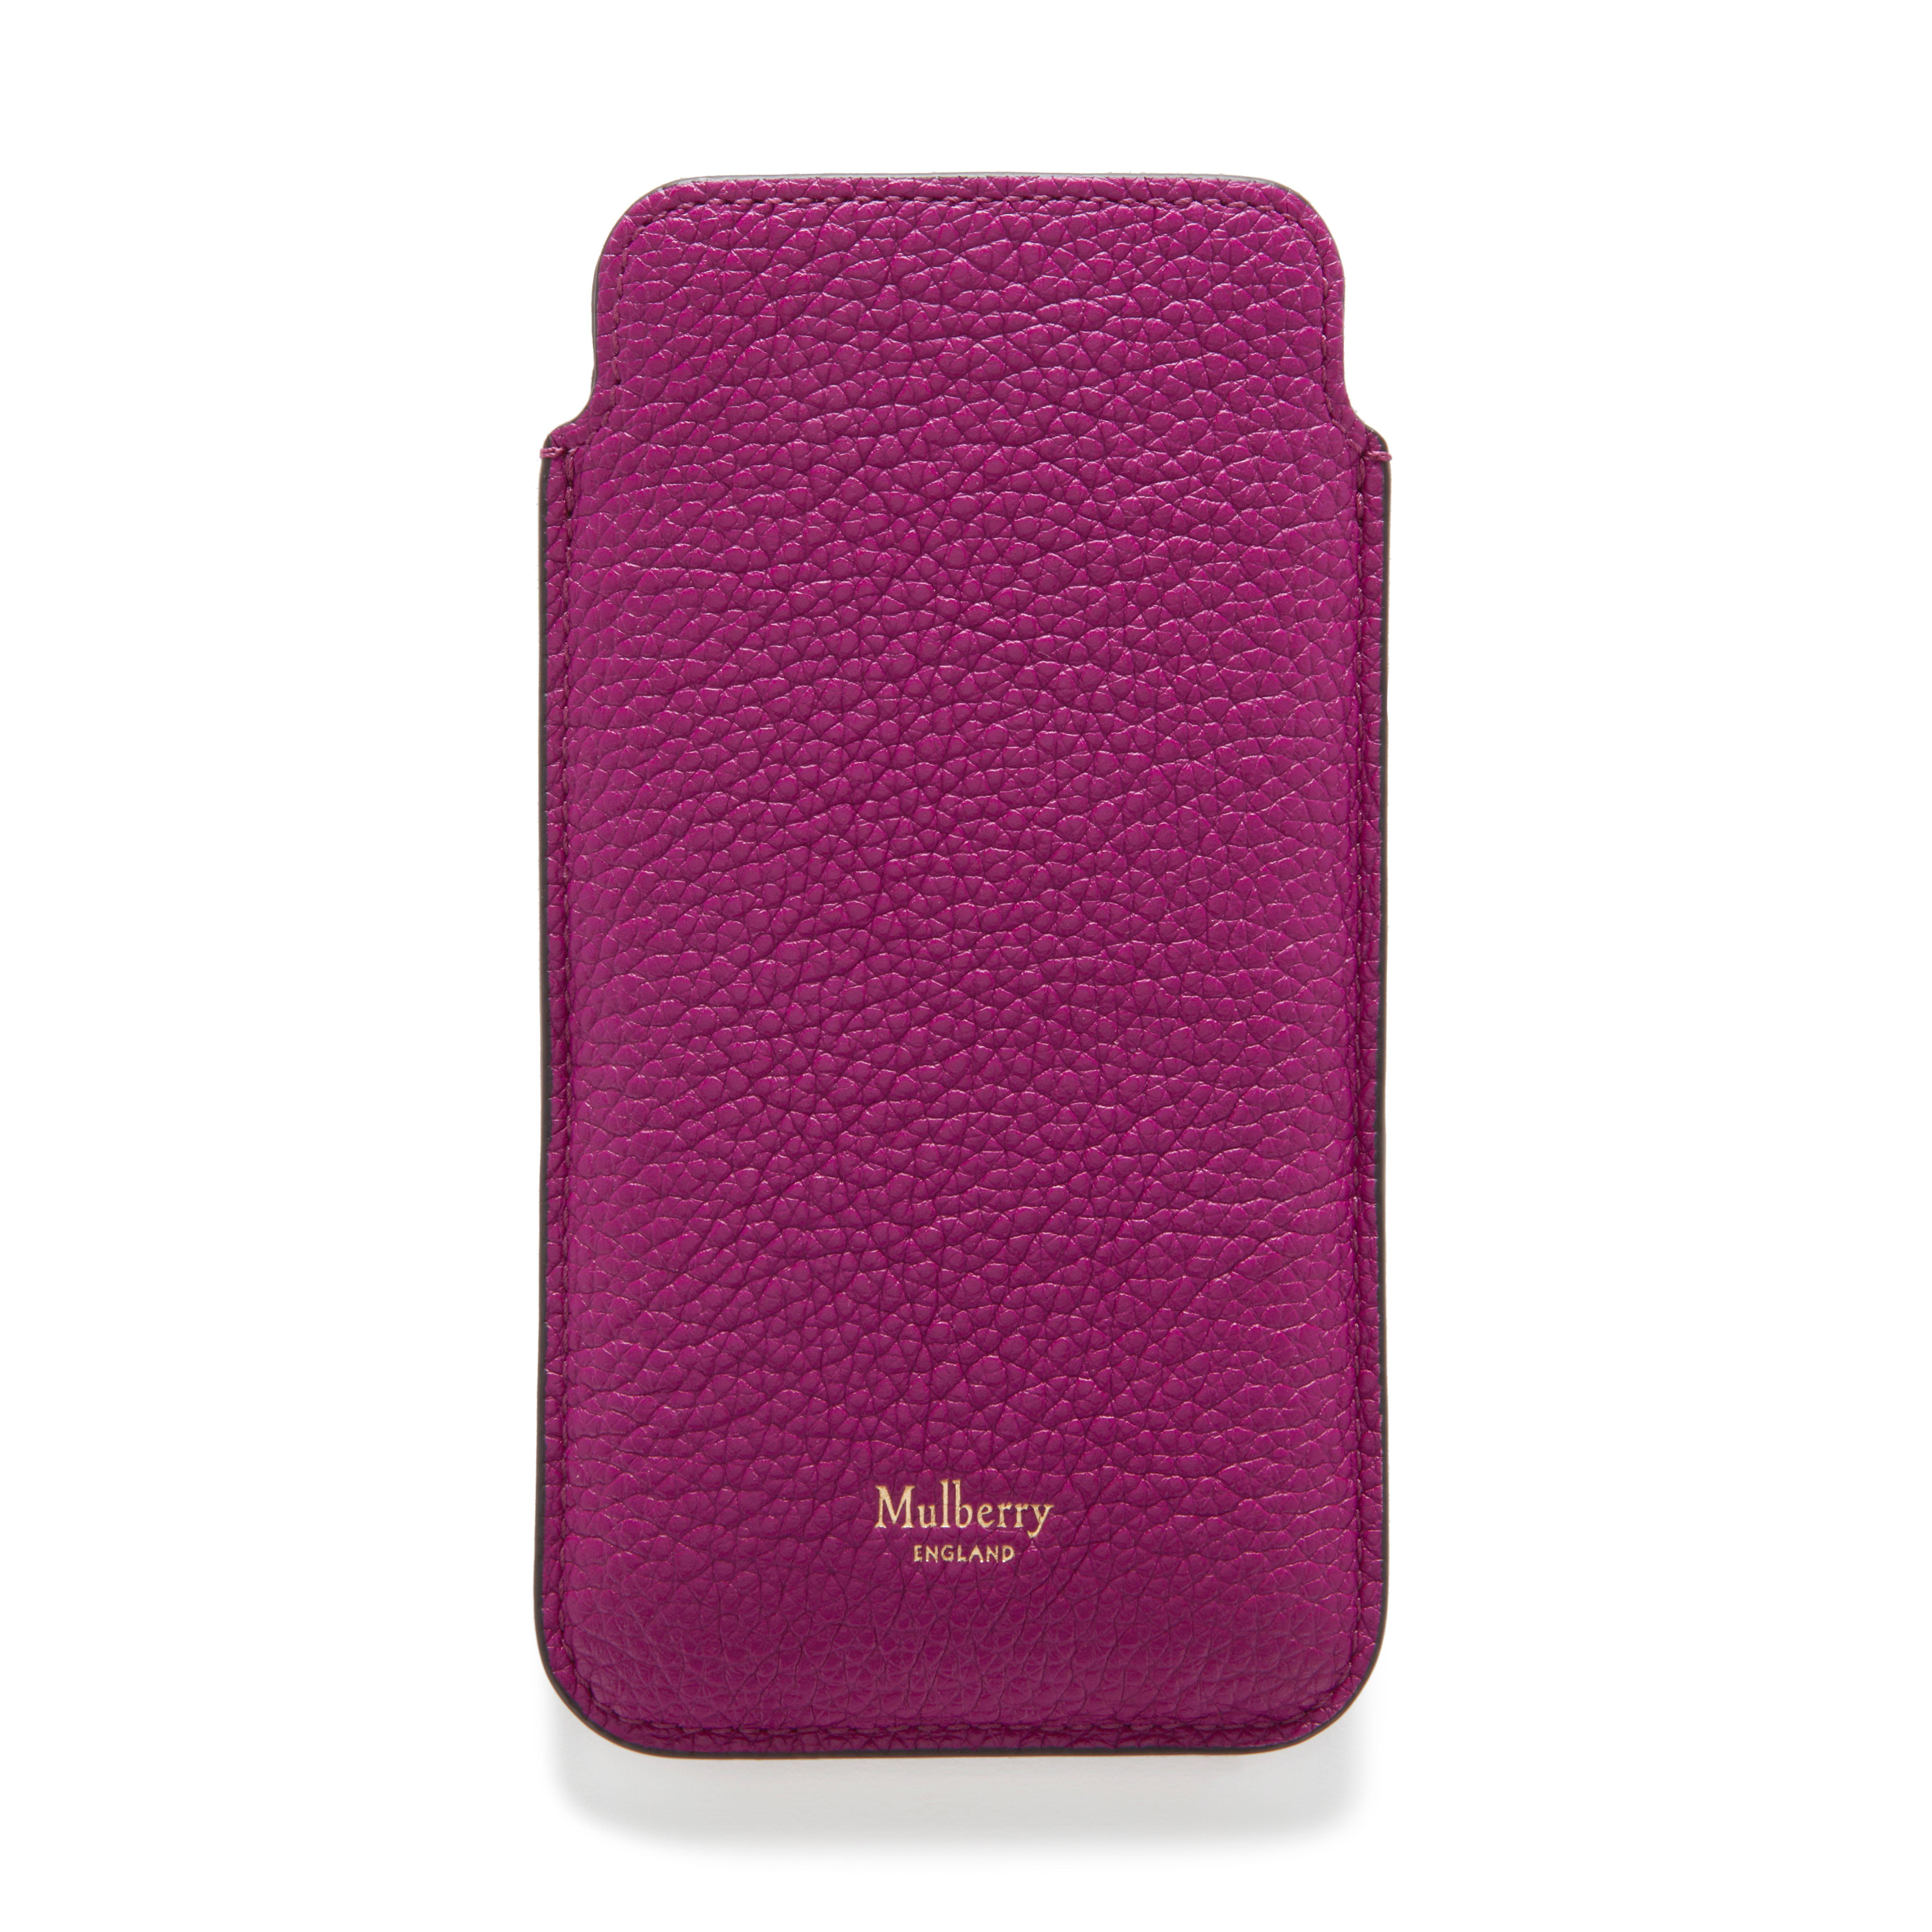 Mulberry Leather Iphone 6/7 Cover in Violet (Purple) - Lyst